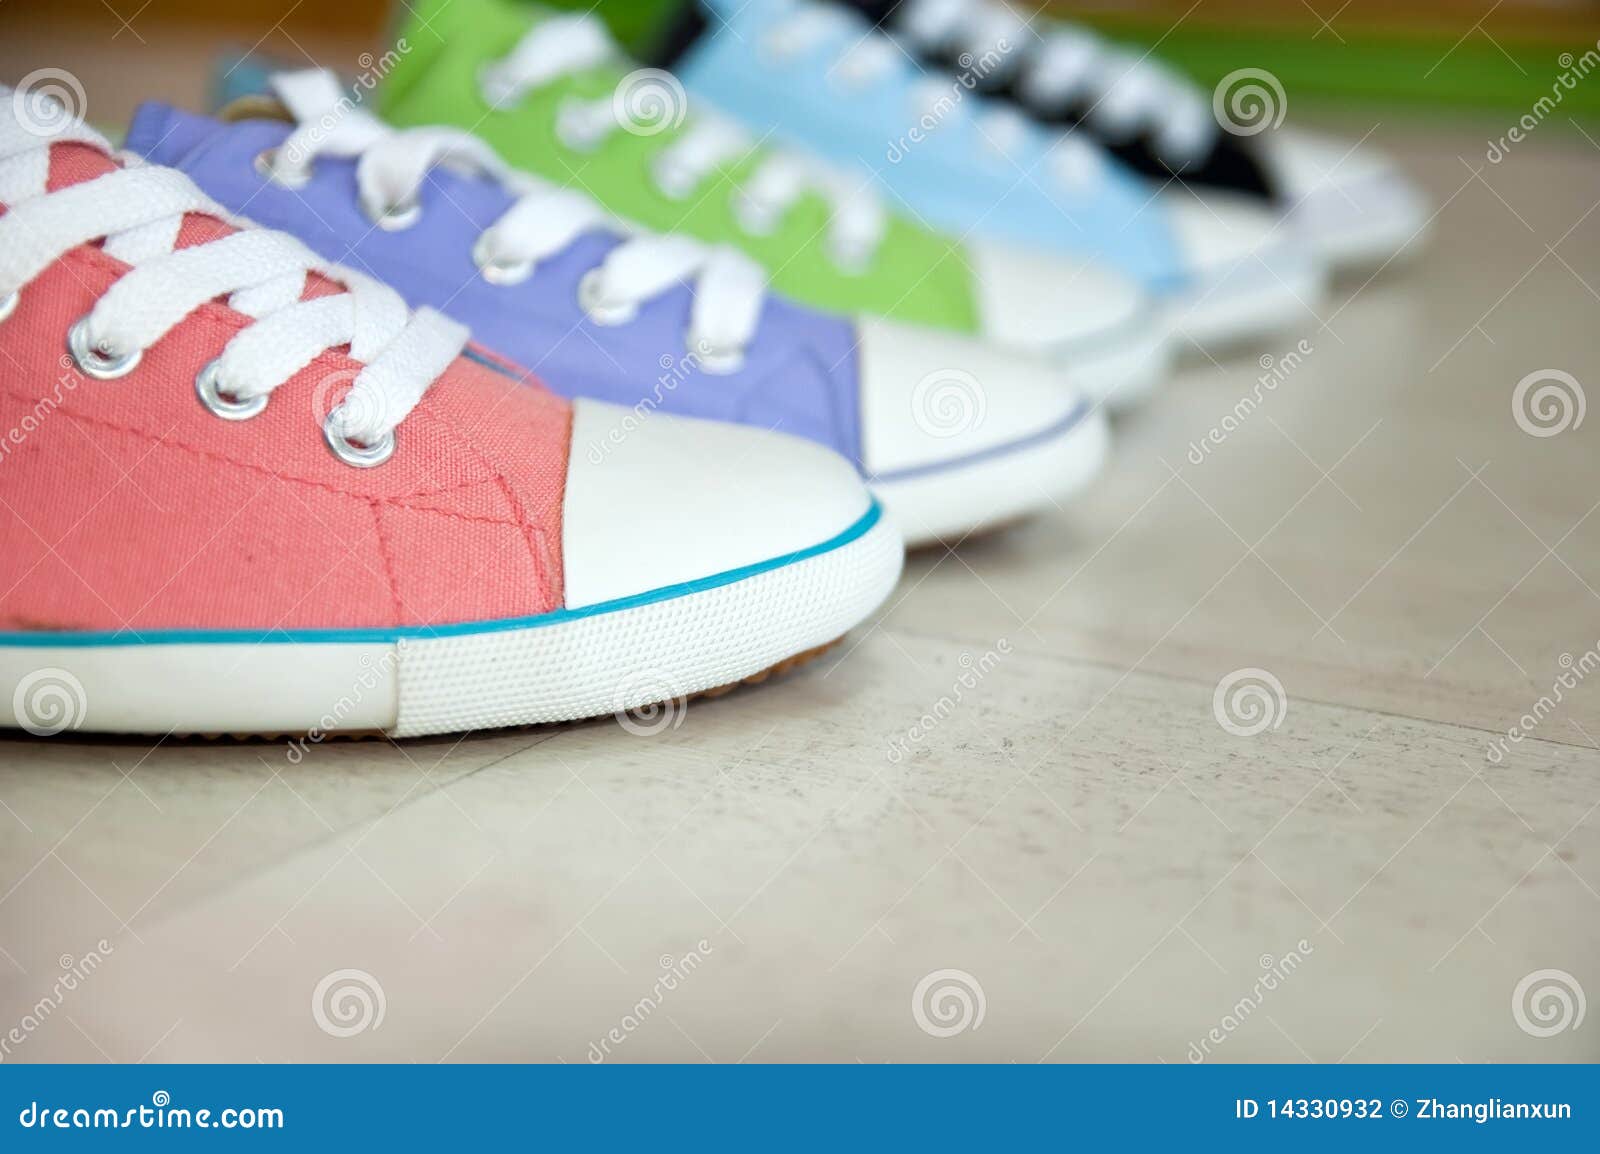 Five different color shoes stock photo. Image of